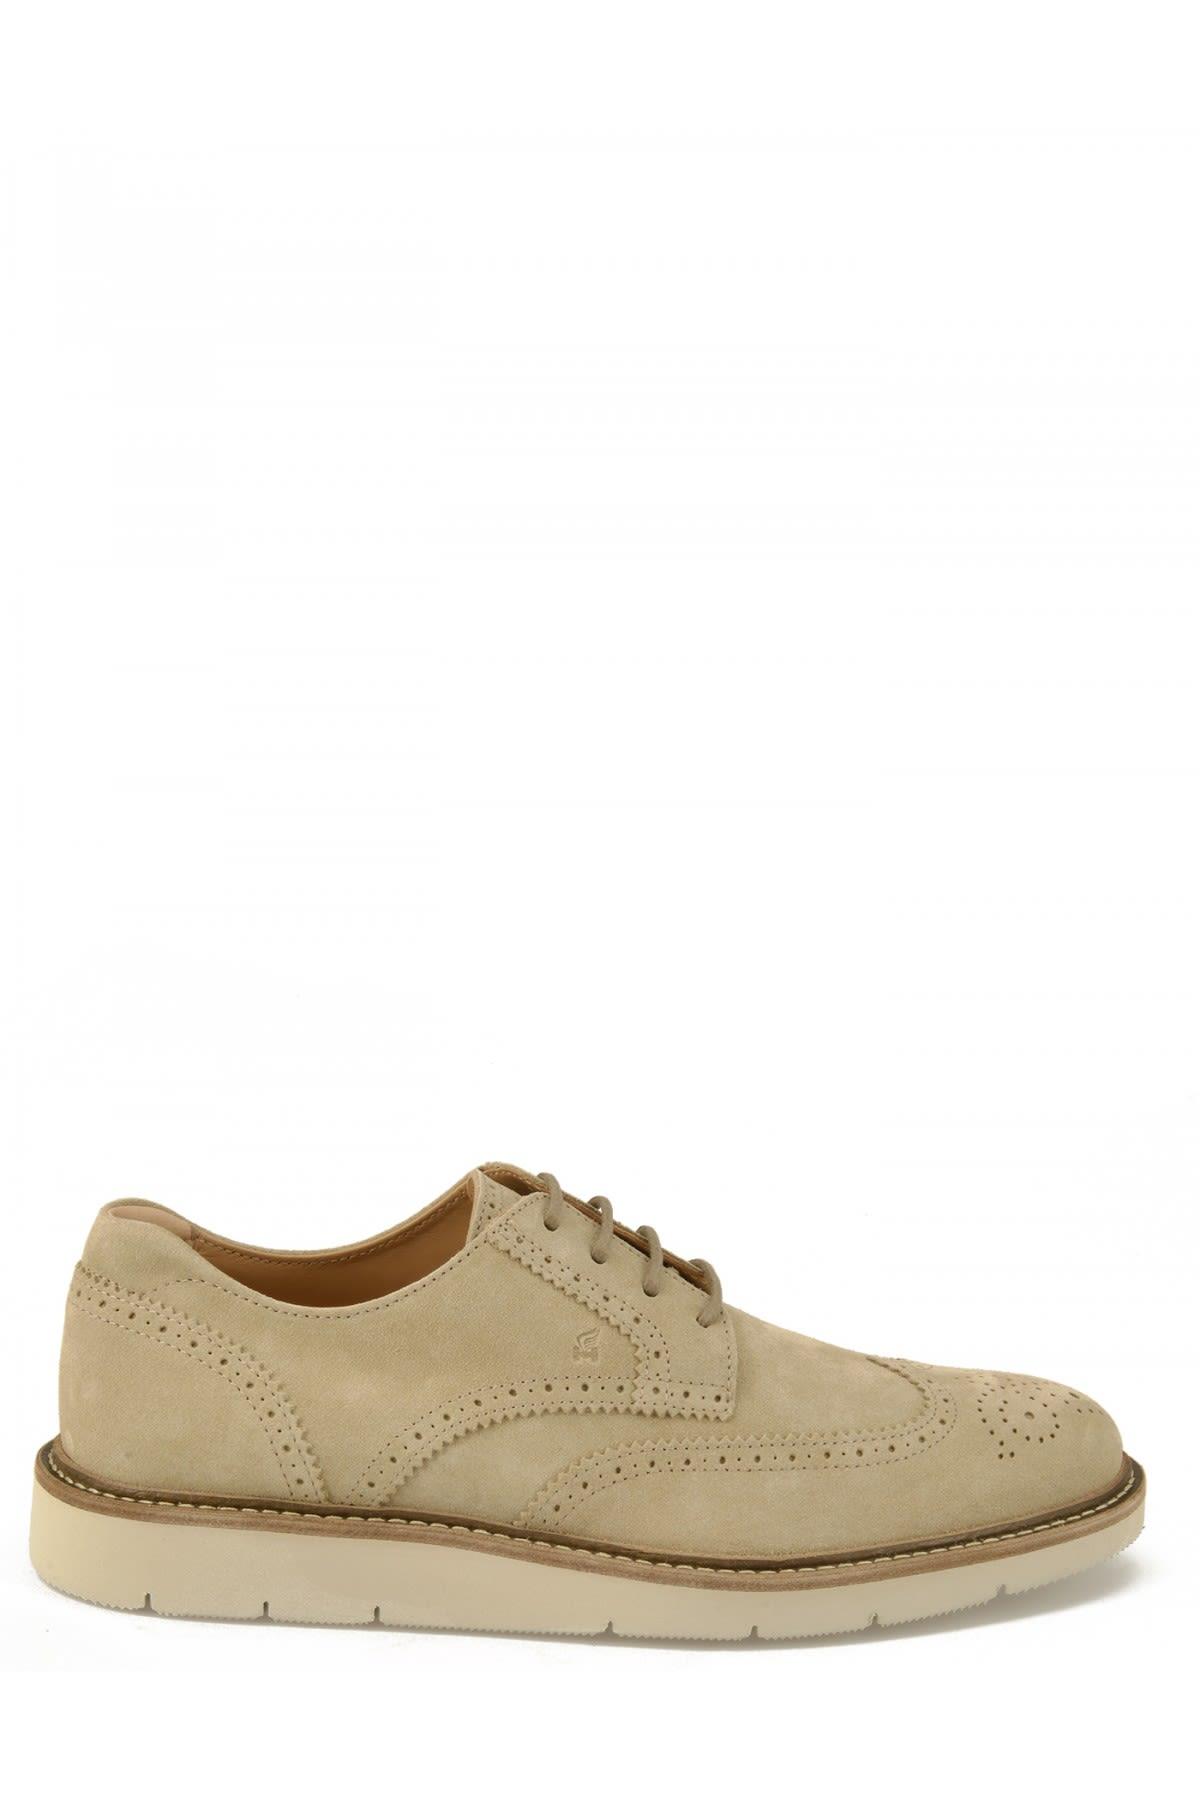 Hogan Leather Lace-up Shoes in Brown for Men | Lyst